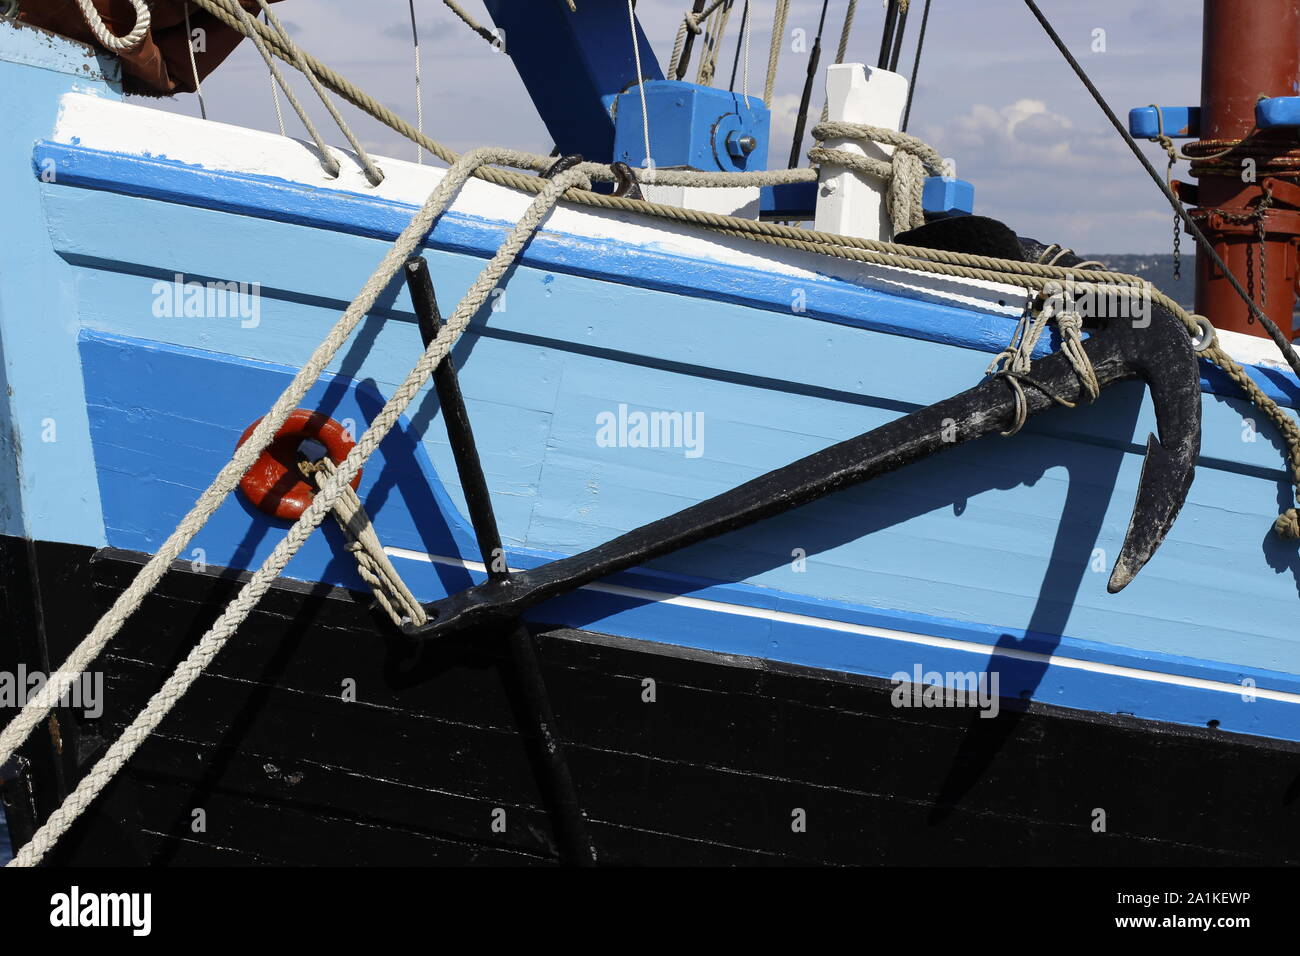 detail of a large blue wooden fishing boat showing rigging, mast and anchor Stock Photo